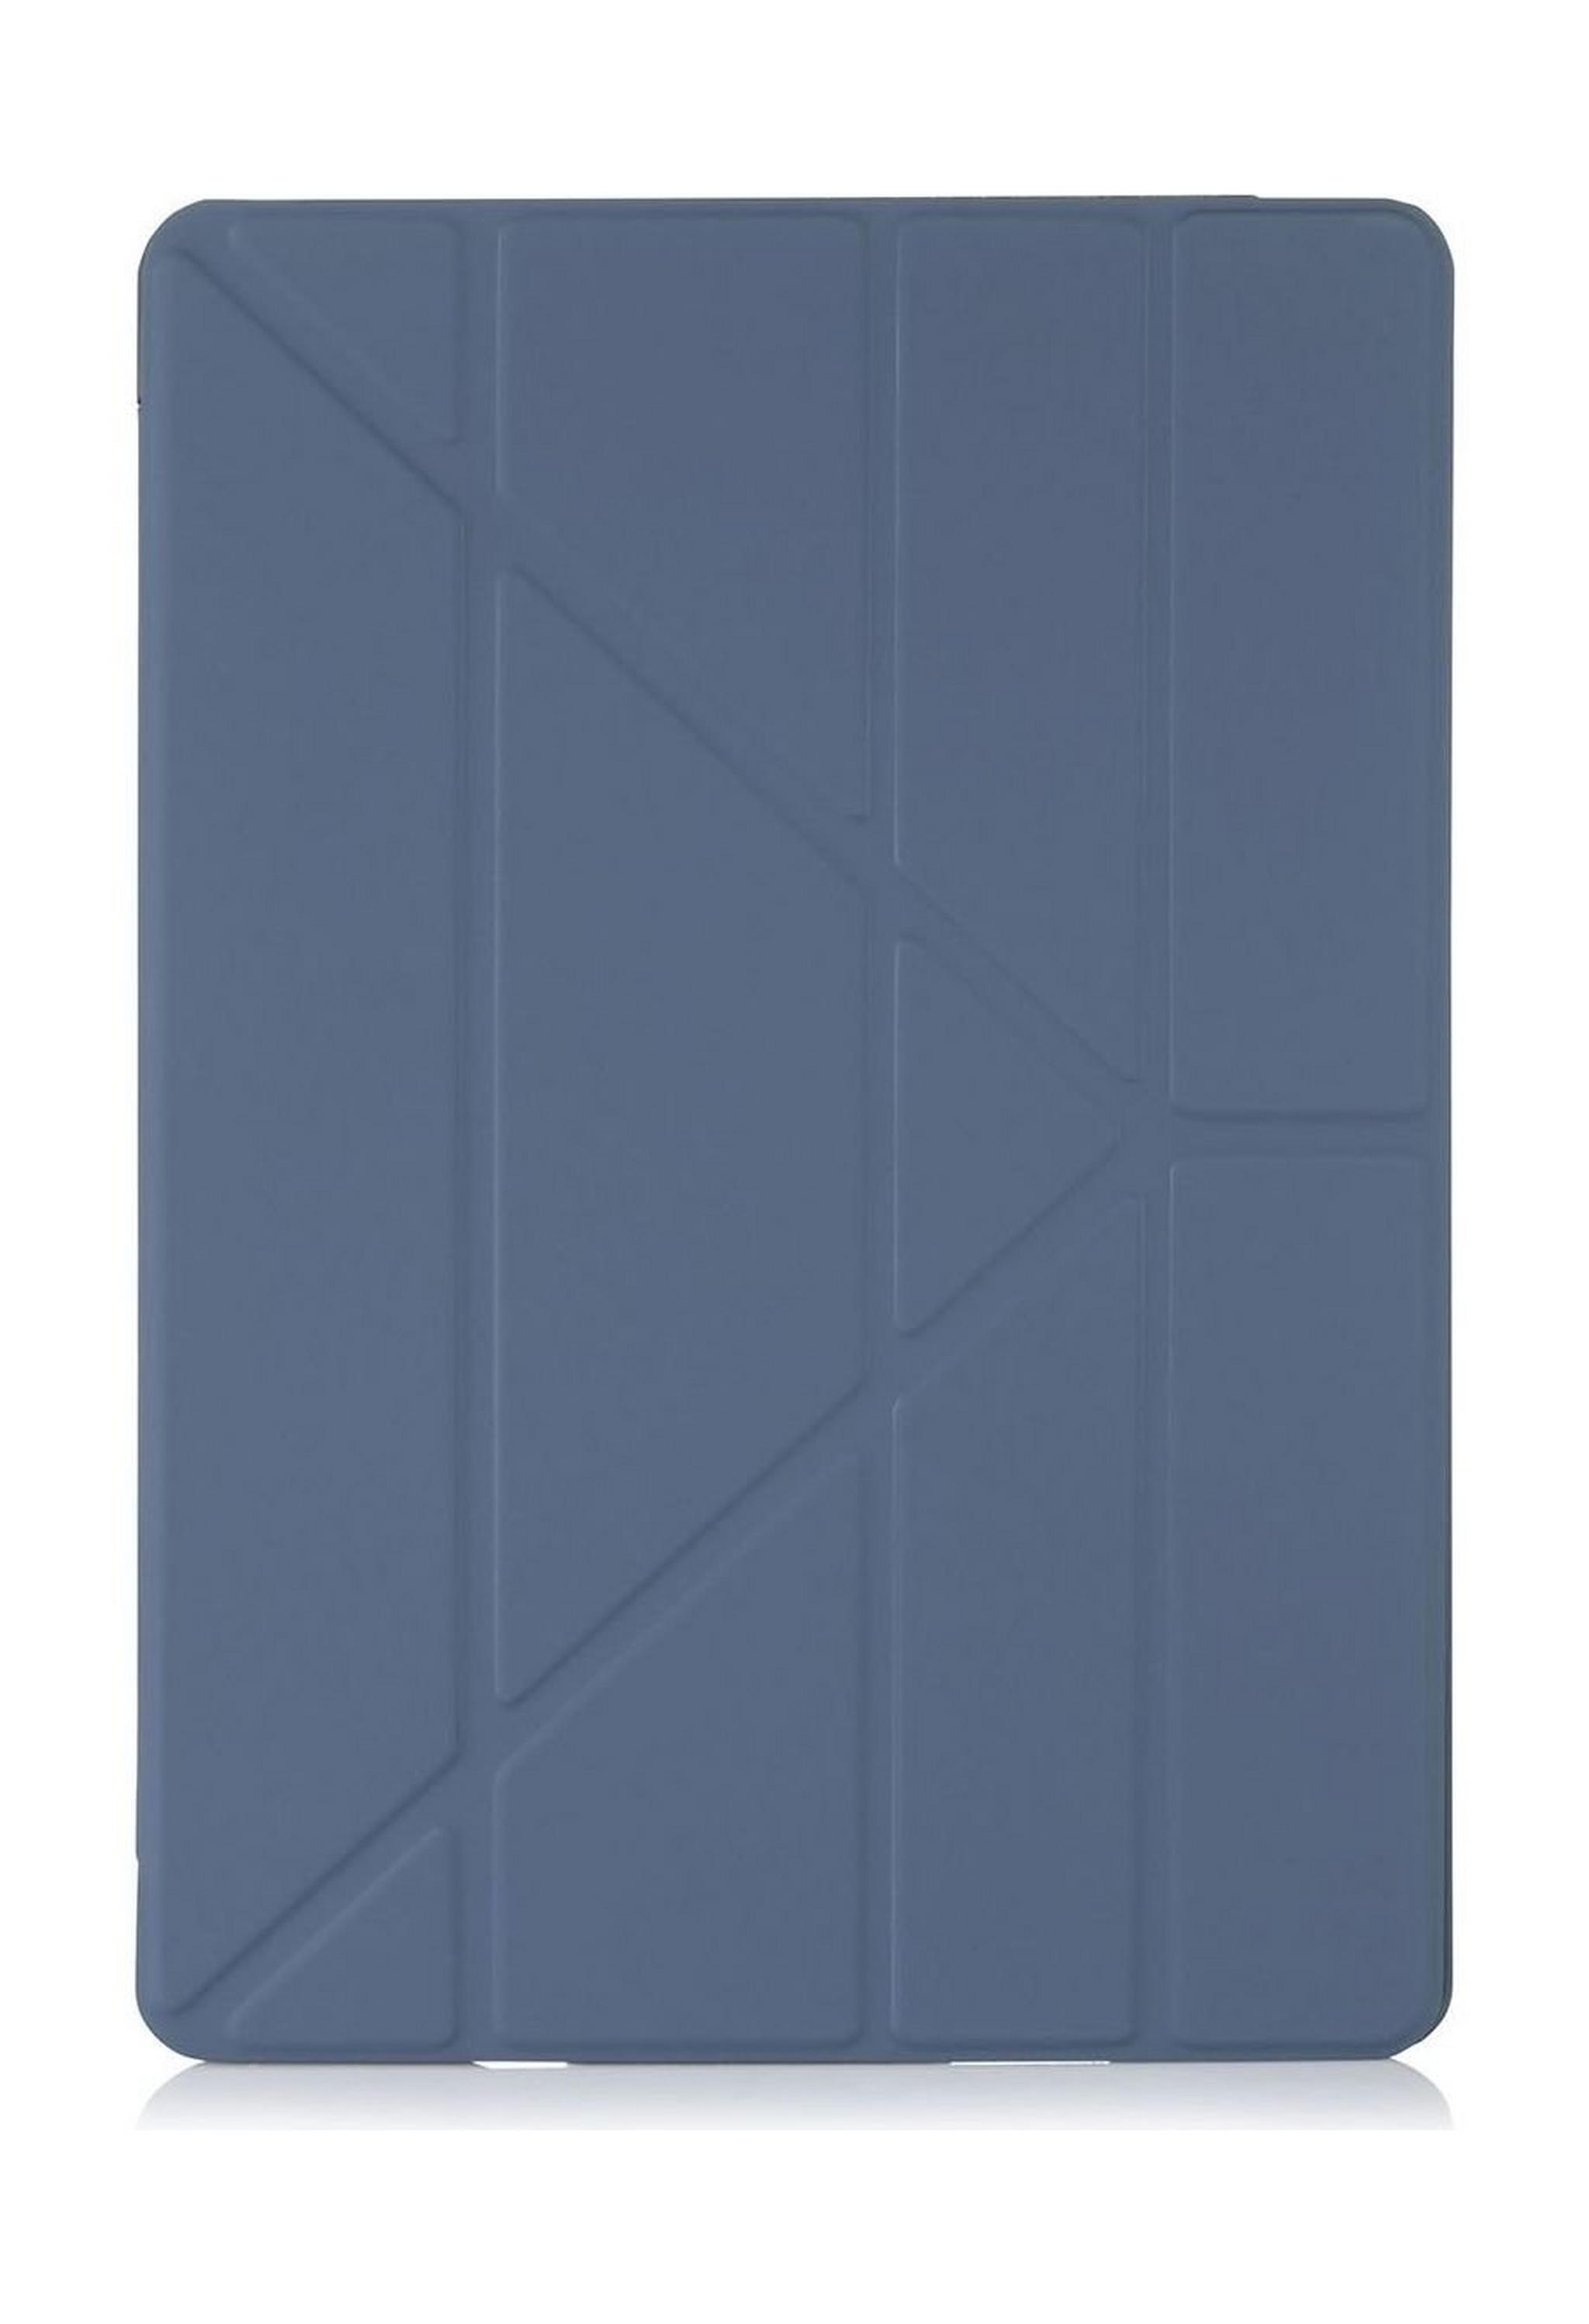 Pipetto Origami Folding Case and Stand For iPad 11-inch (P045-51-4) - Navy